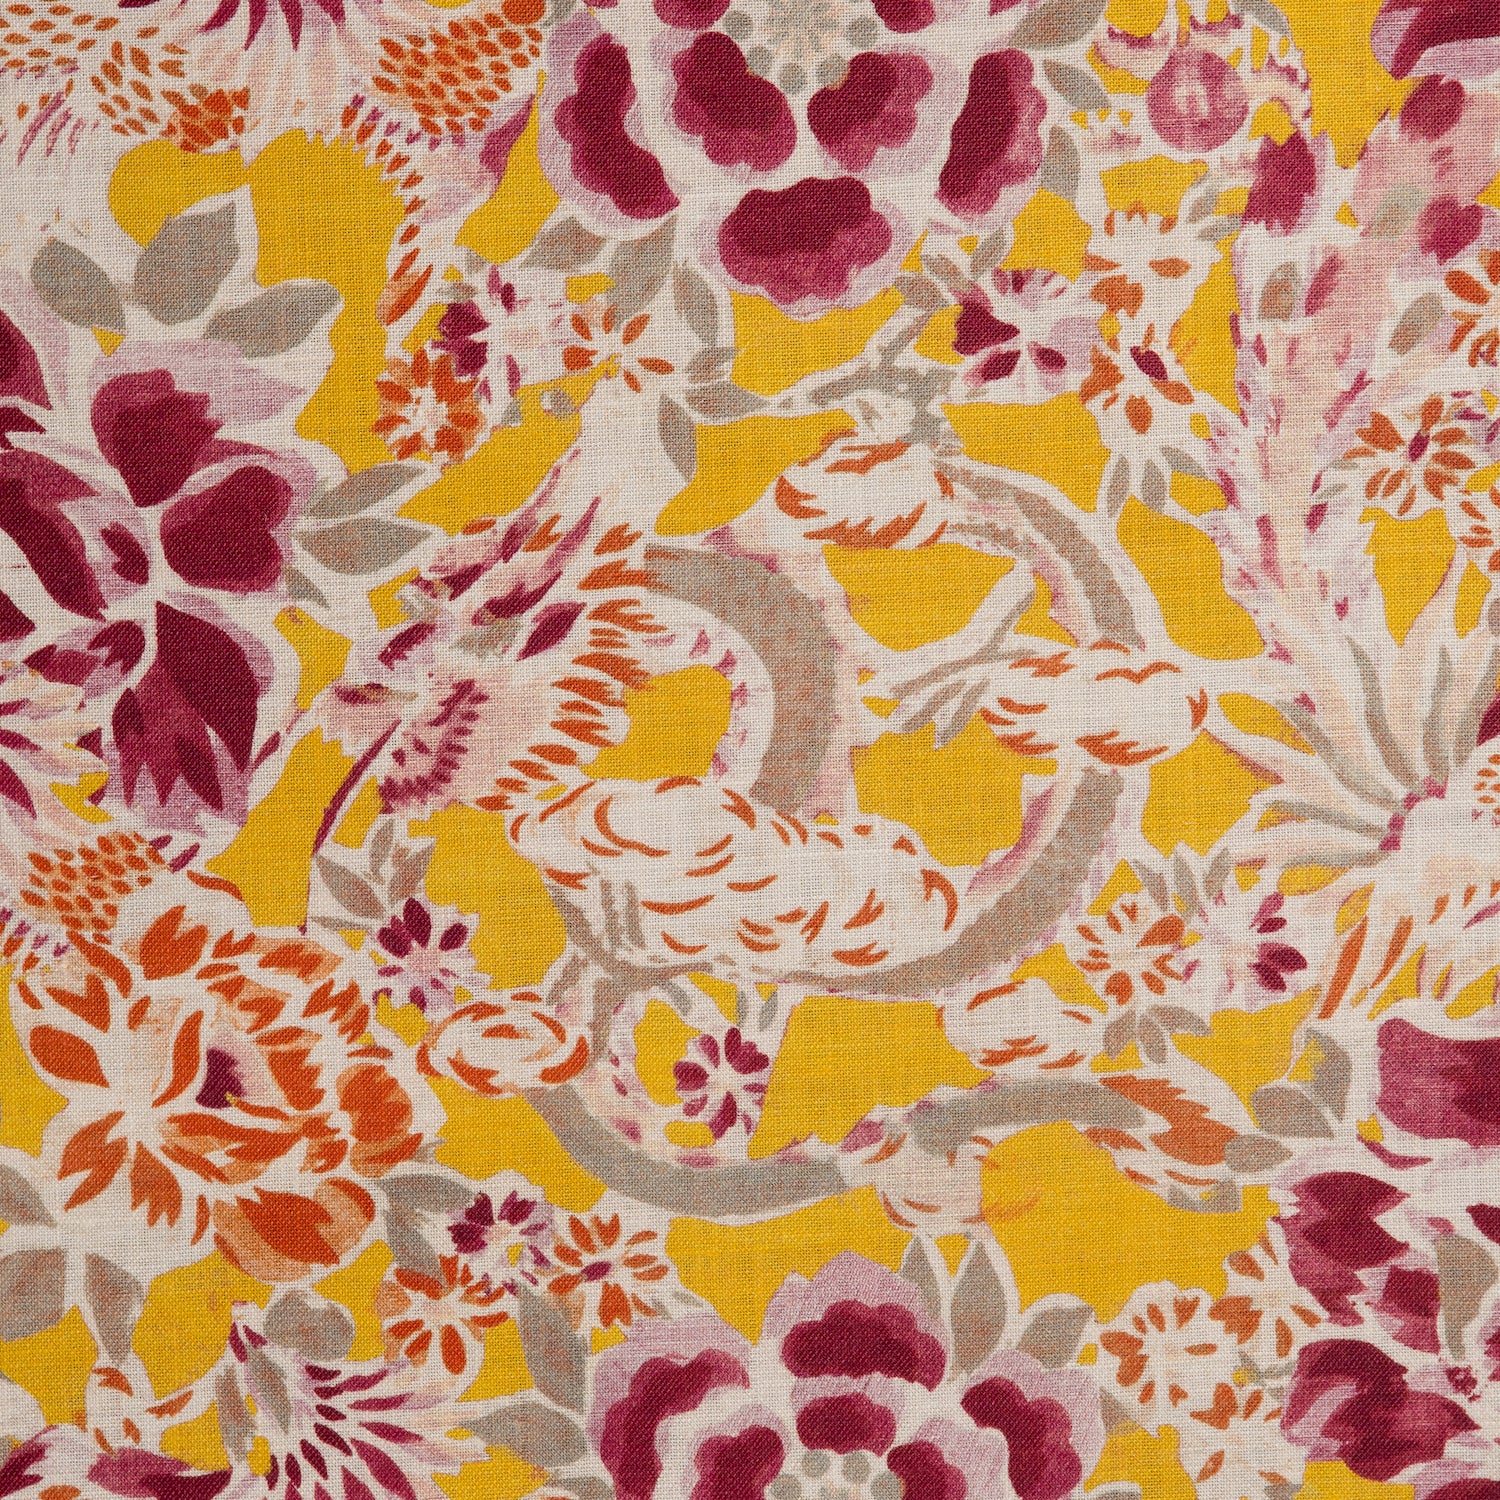 Detail of a linen fabric in a painterly floral pattern in shades of white, orange and purple on a mustard field.